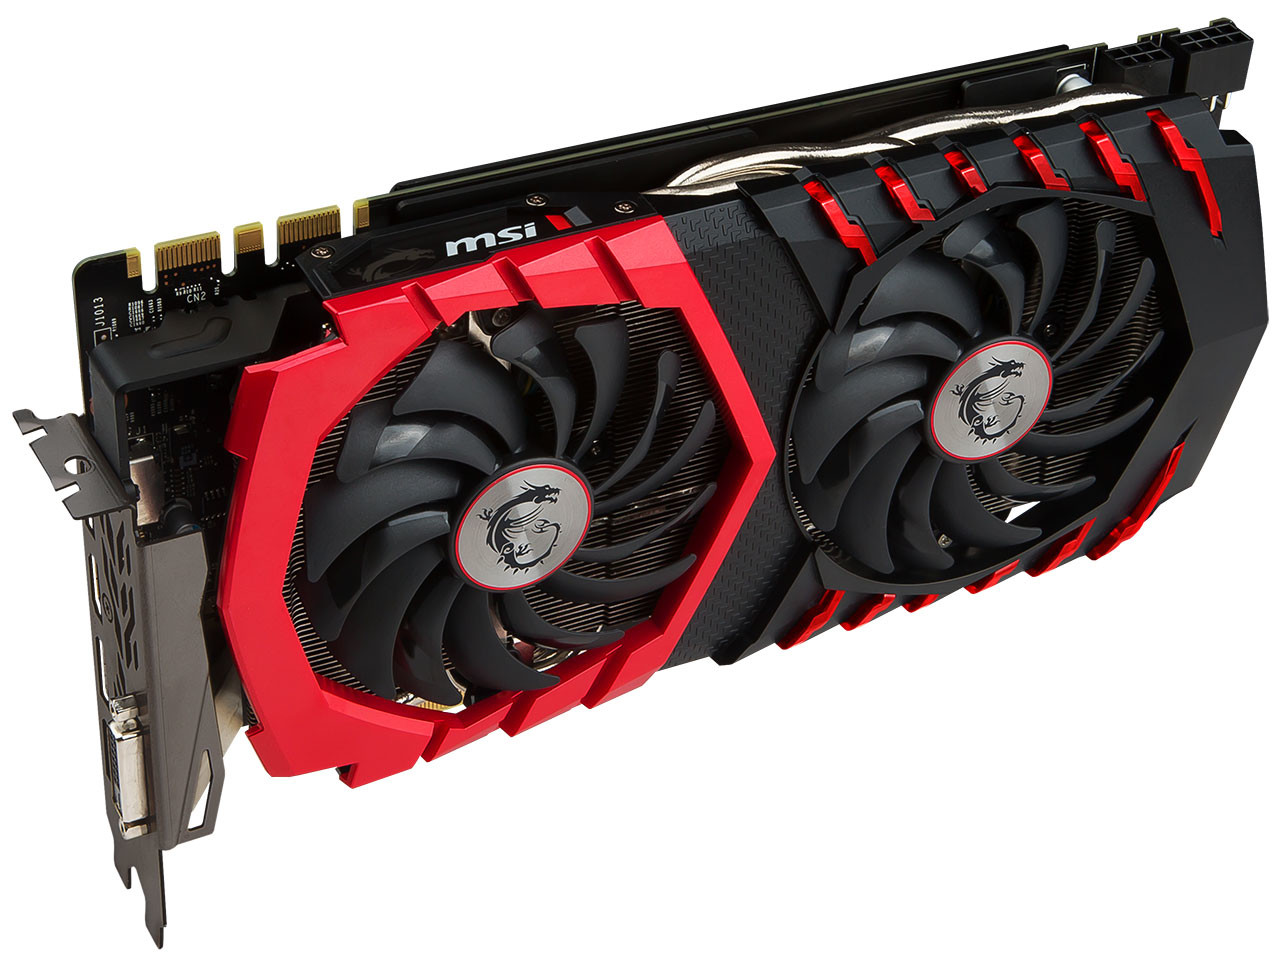 MSI Announces the Gaming Z Series GeForce GTX 1080 and GTX 1070